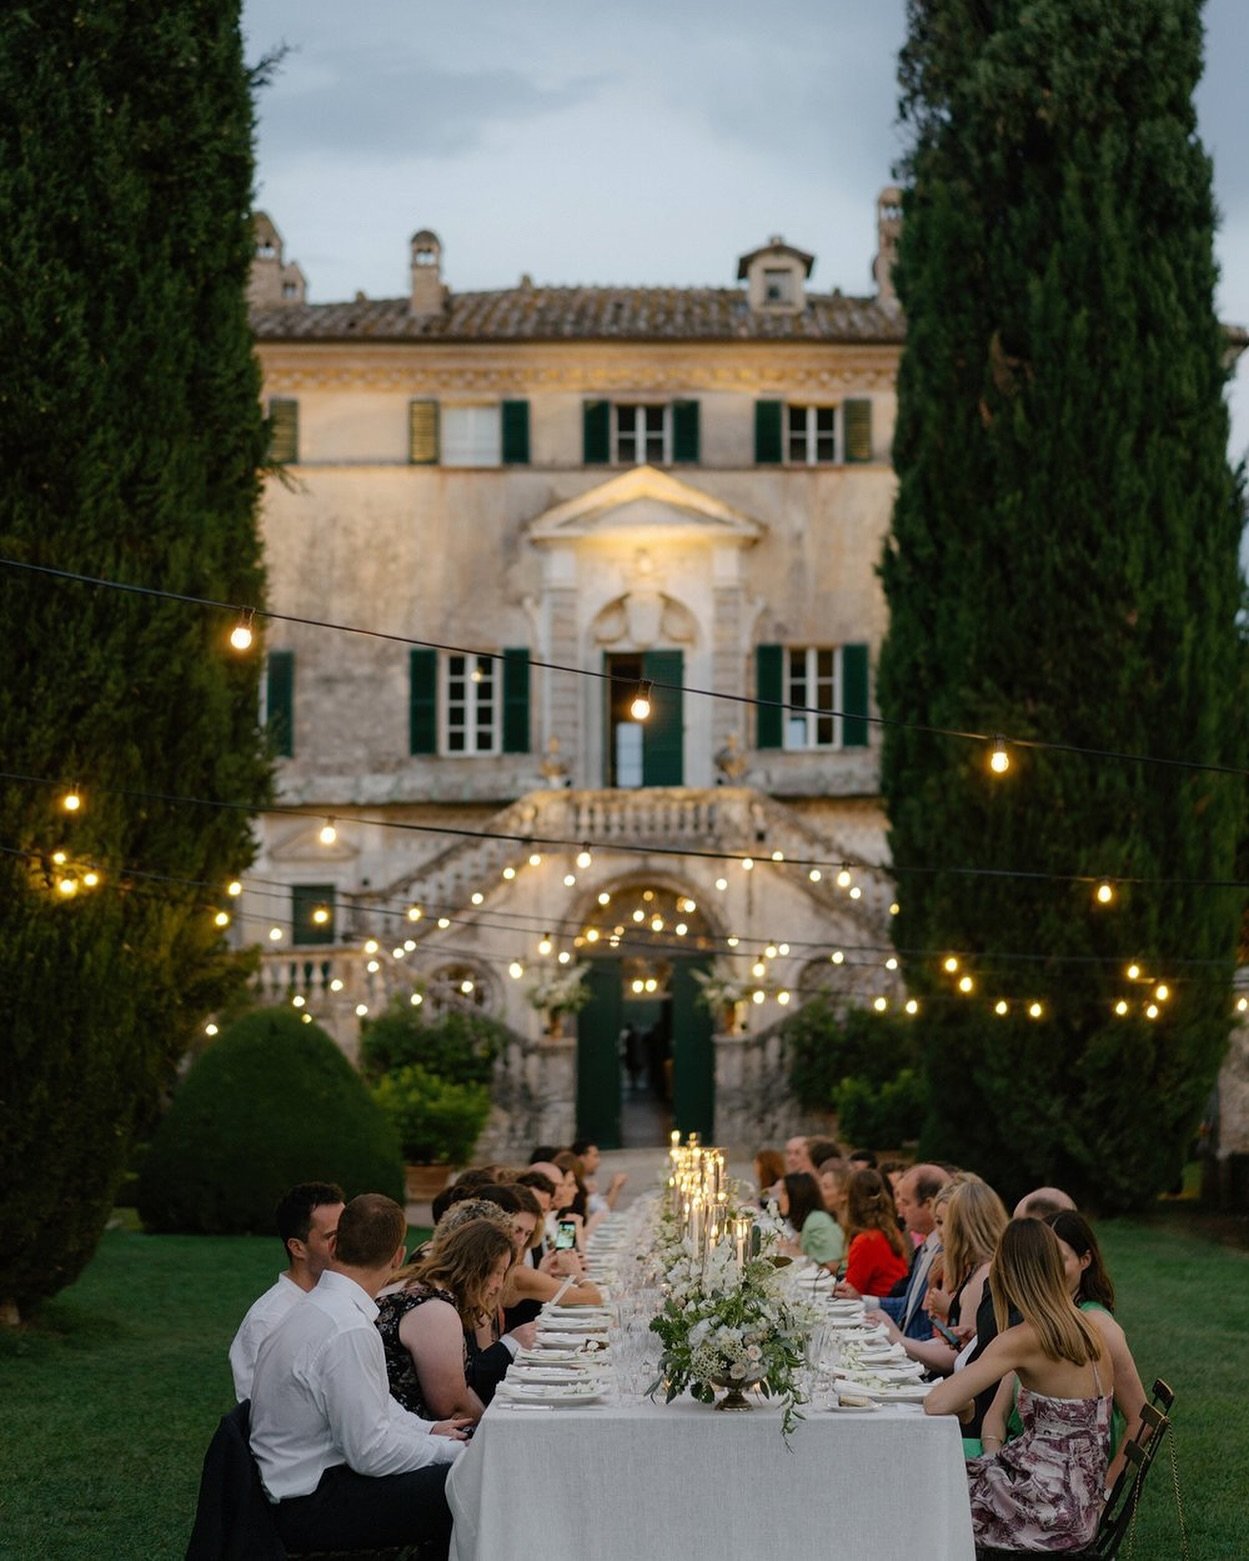 Its of the essence to create a delightful and discerning milieu where your guests can feel relaxed and enjoy their wedding dinner! @theweddingcare_cristinaditta @cinziabruschini @larosacaninafirenze @cetinale @laranavarrinimakeup @emikodavies  @calam